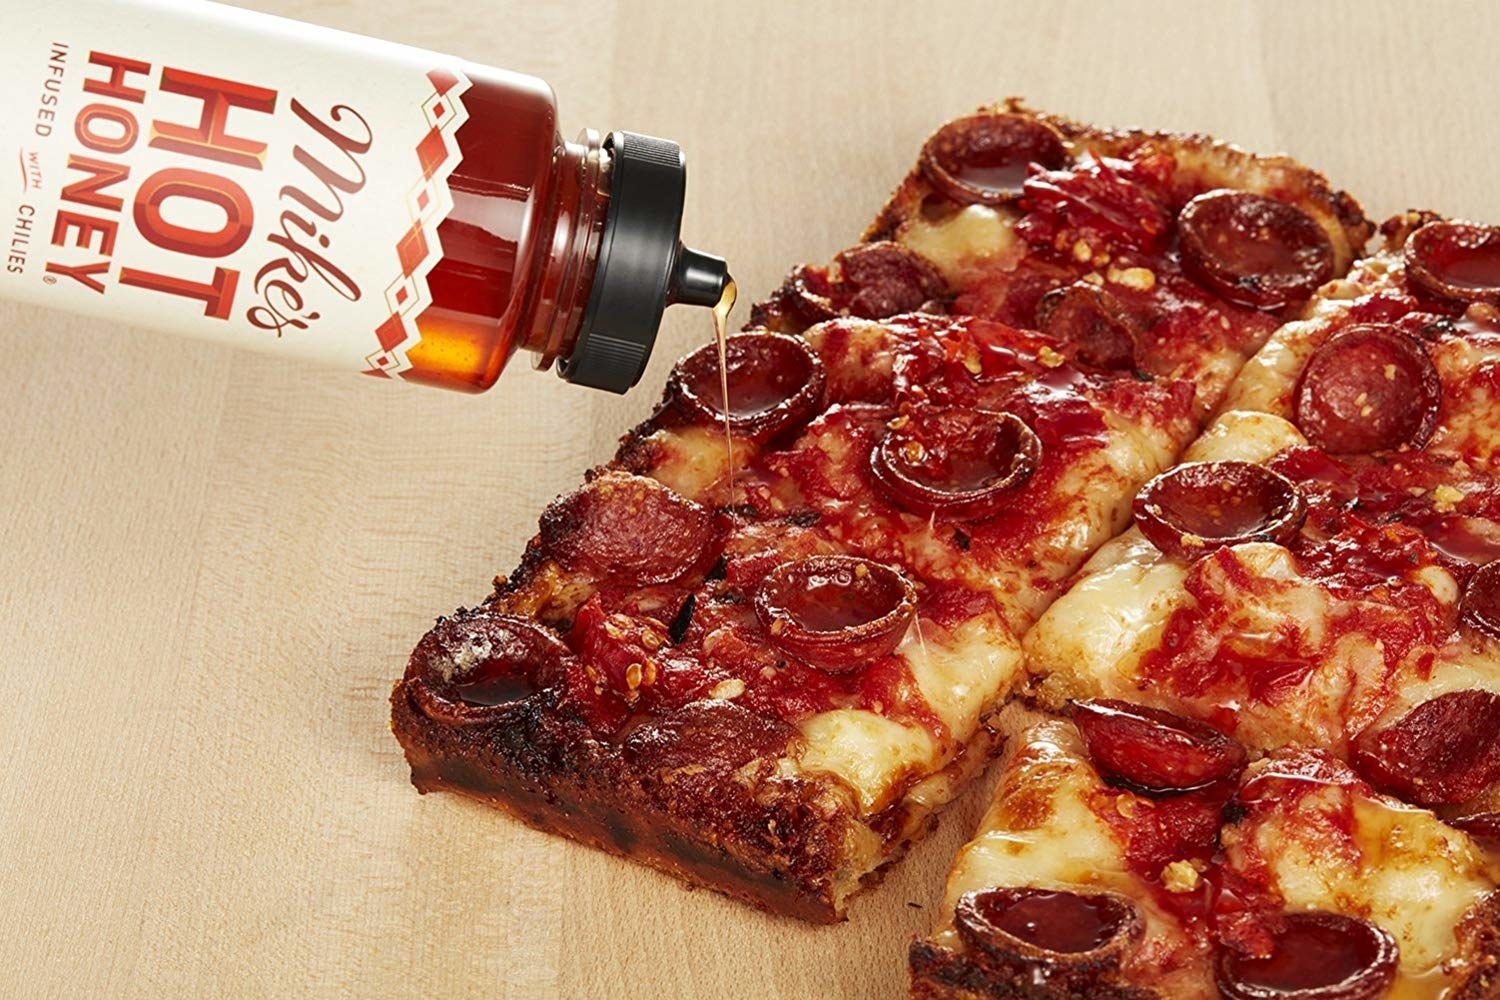 The bottle of honey honey pouring onto a pepperoni pizza